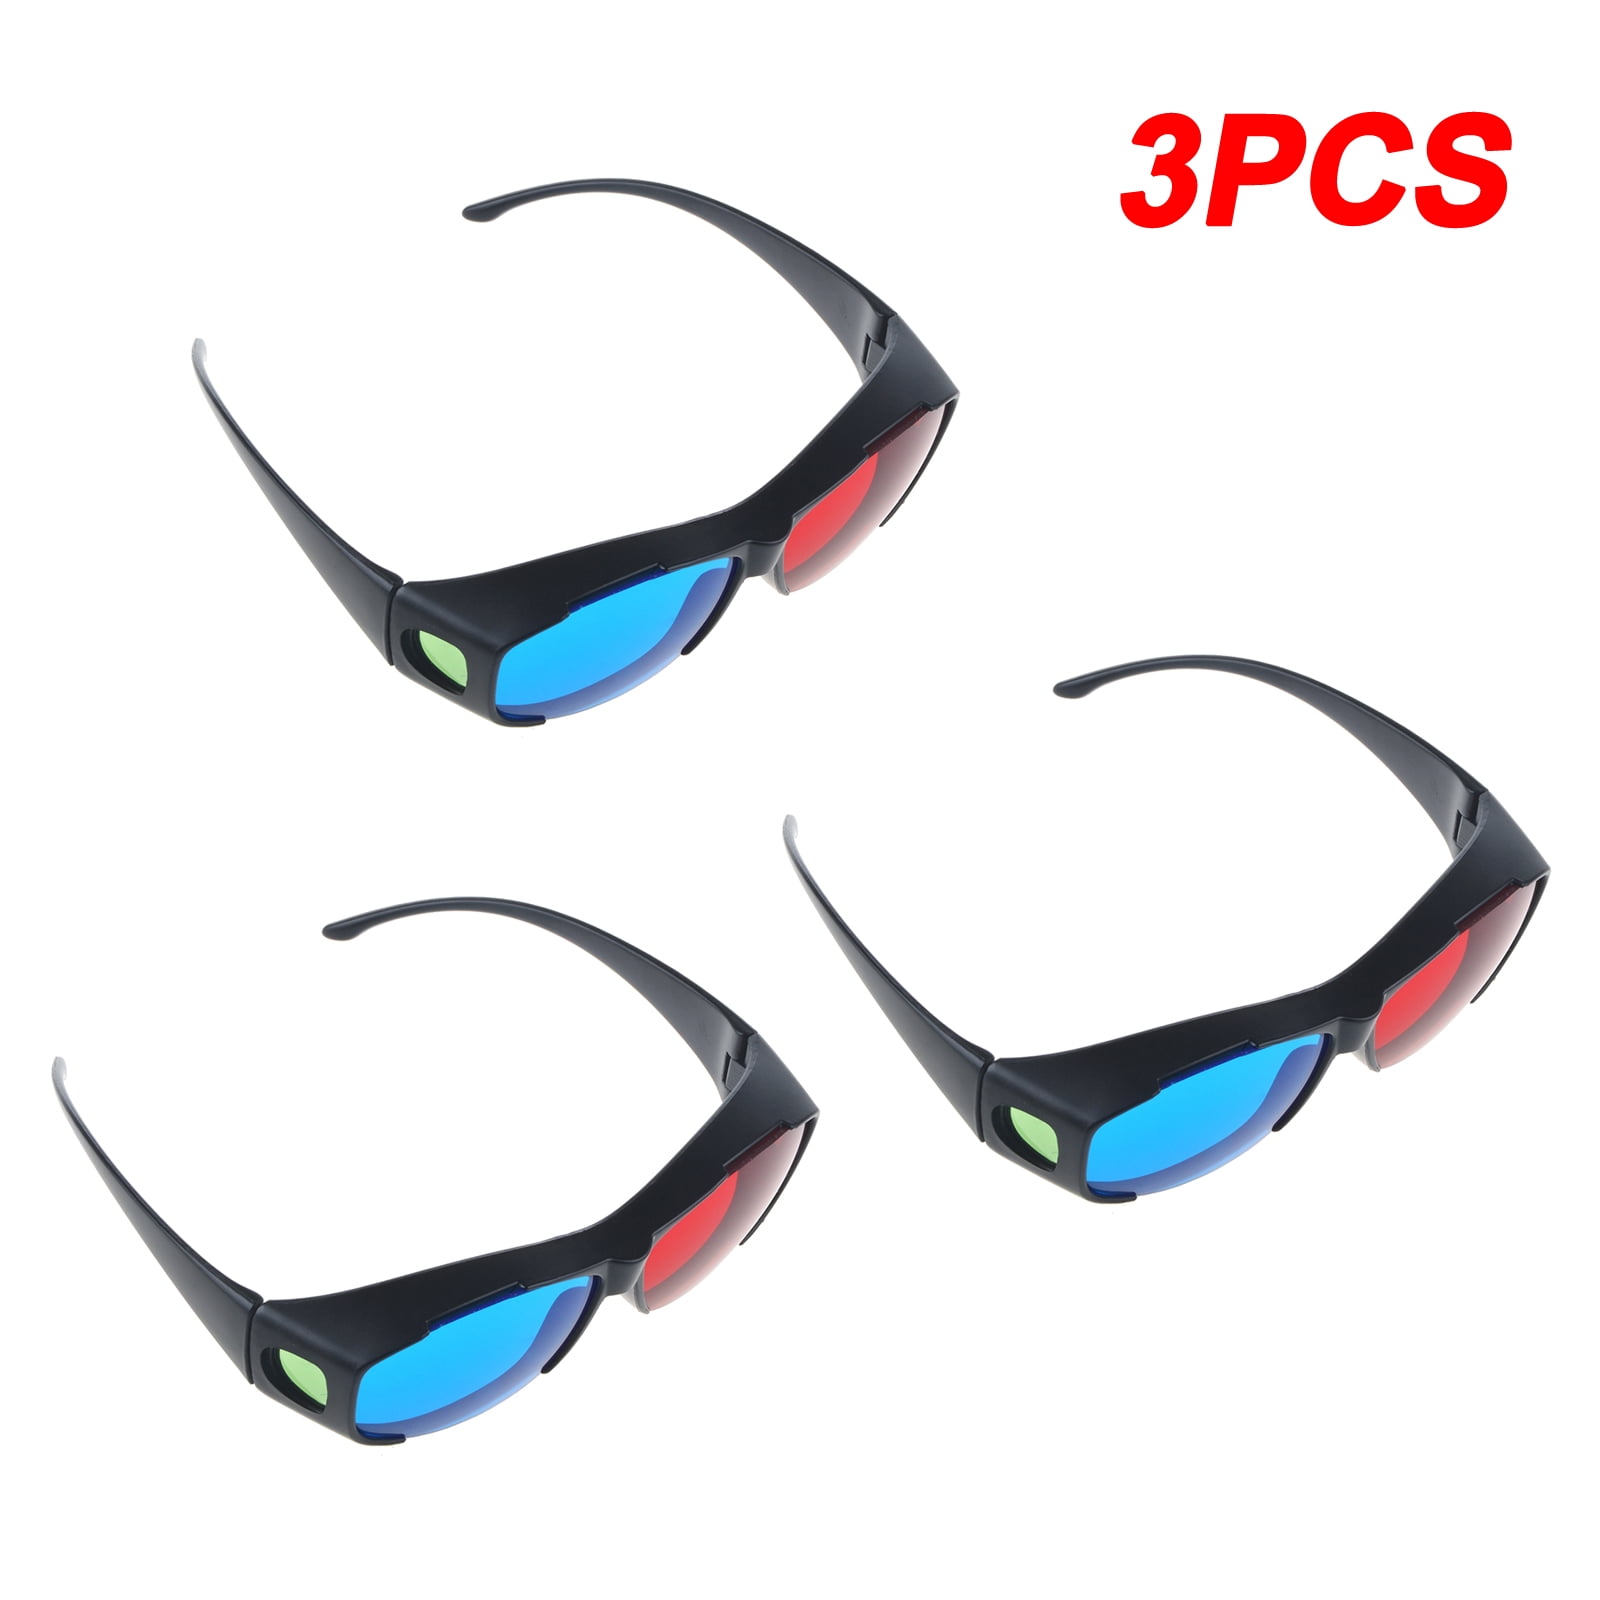 10 Pack Paper Cardboard 3D Glasses 3D Virtual Video View Anaglyph Cyan/Red/Blue 3D Glasses for 3D Movies Internet Publications 3D Video Games 3D DVDs Images Comics 